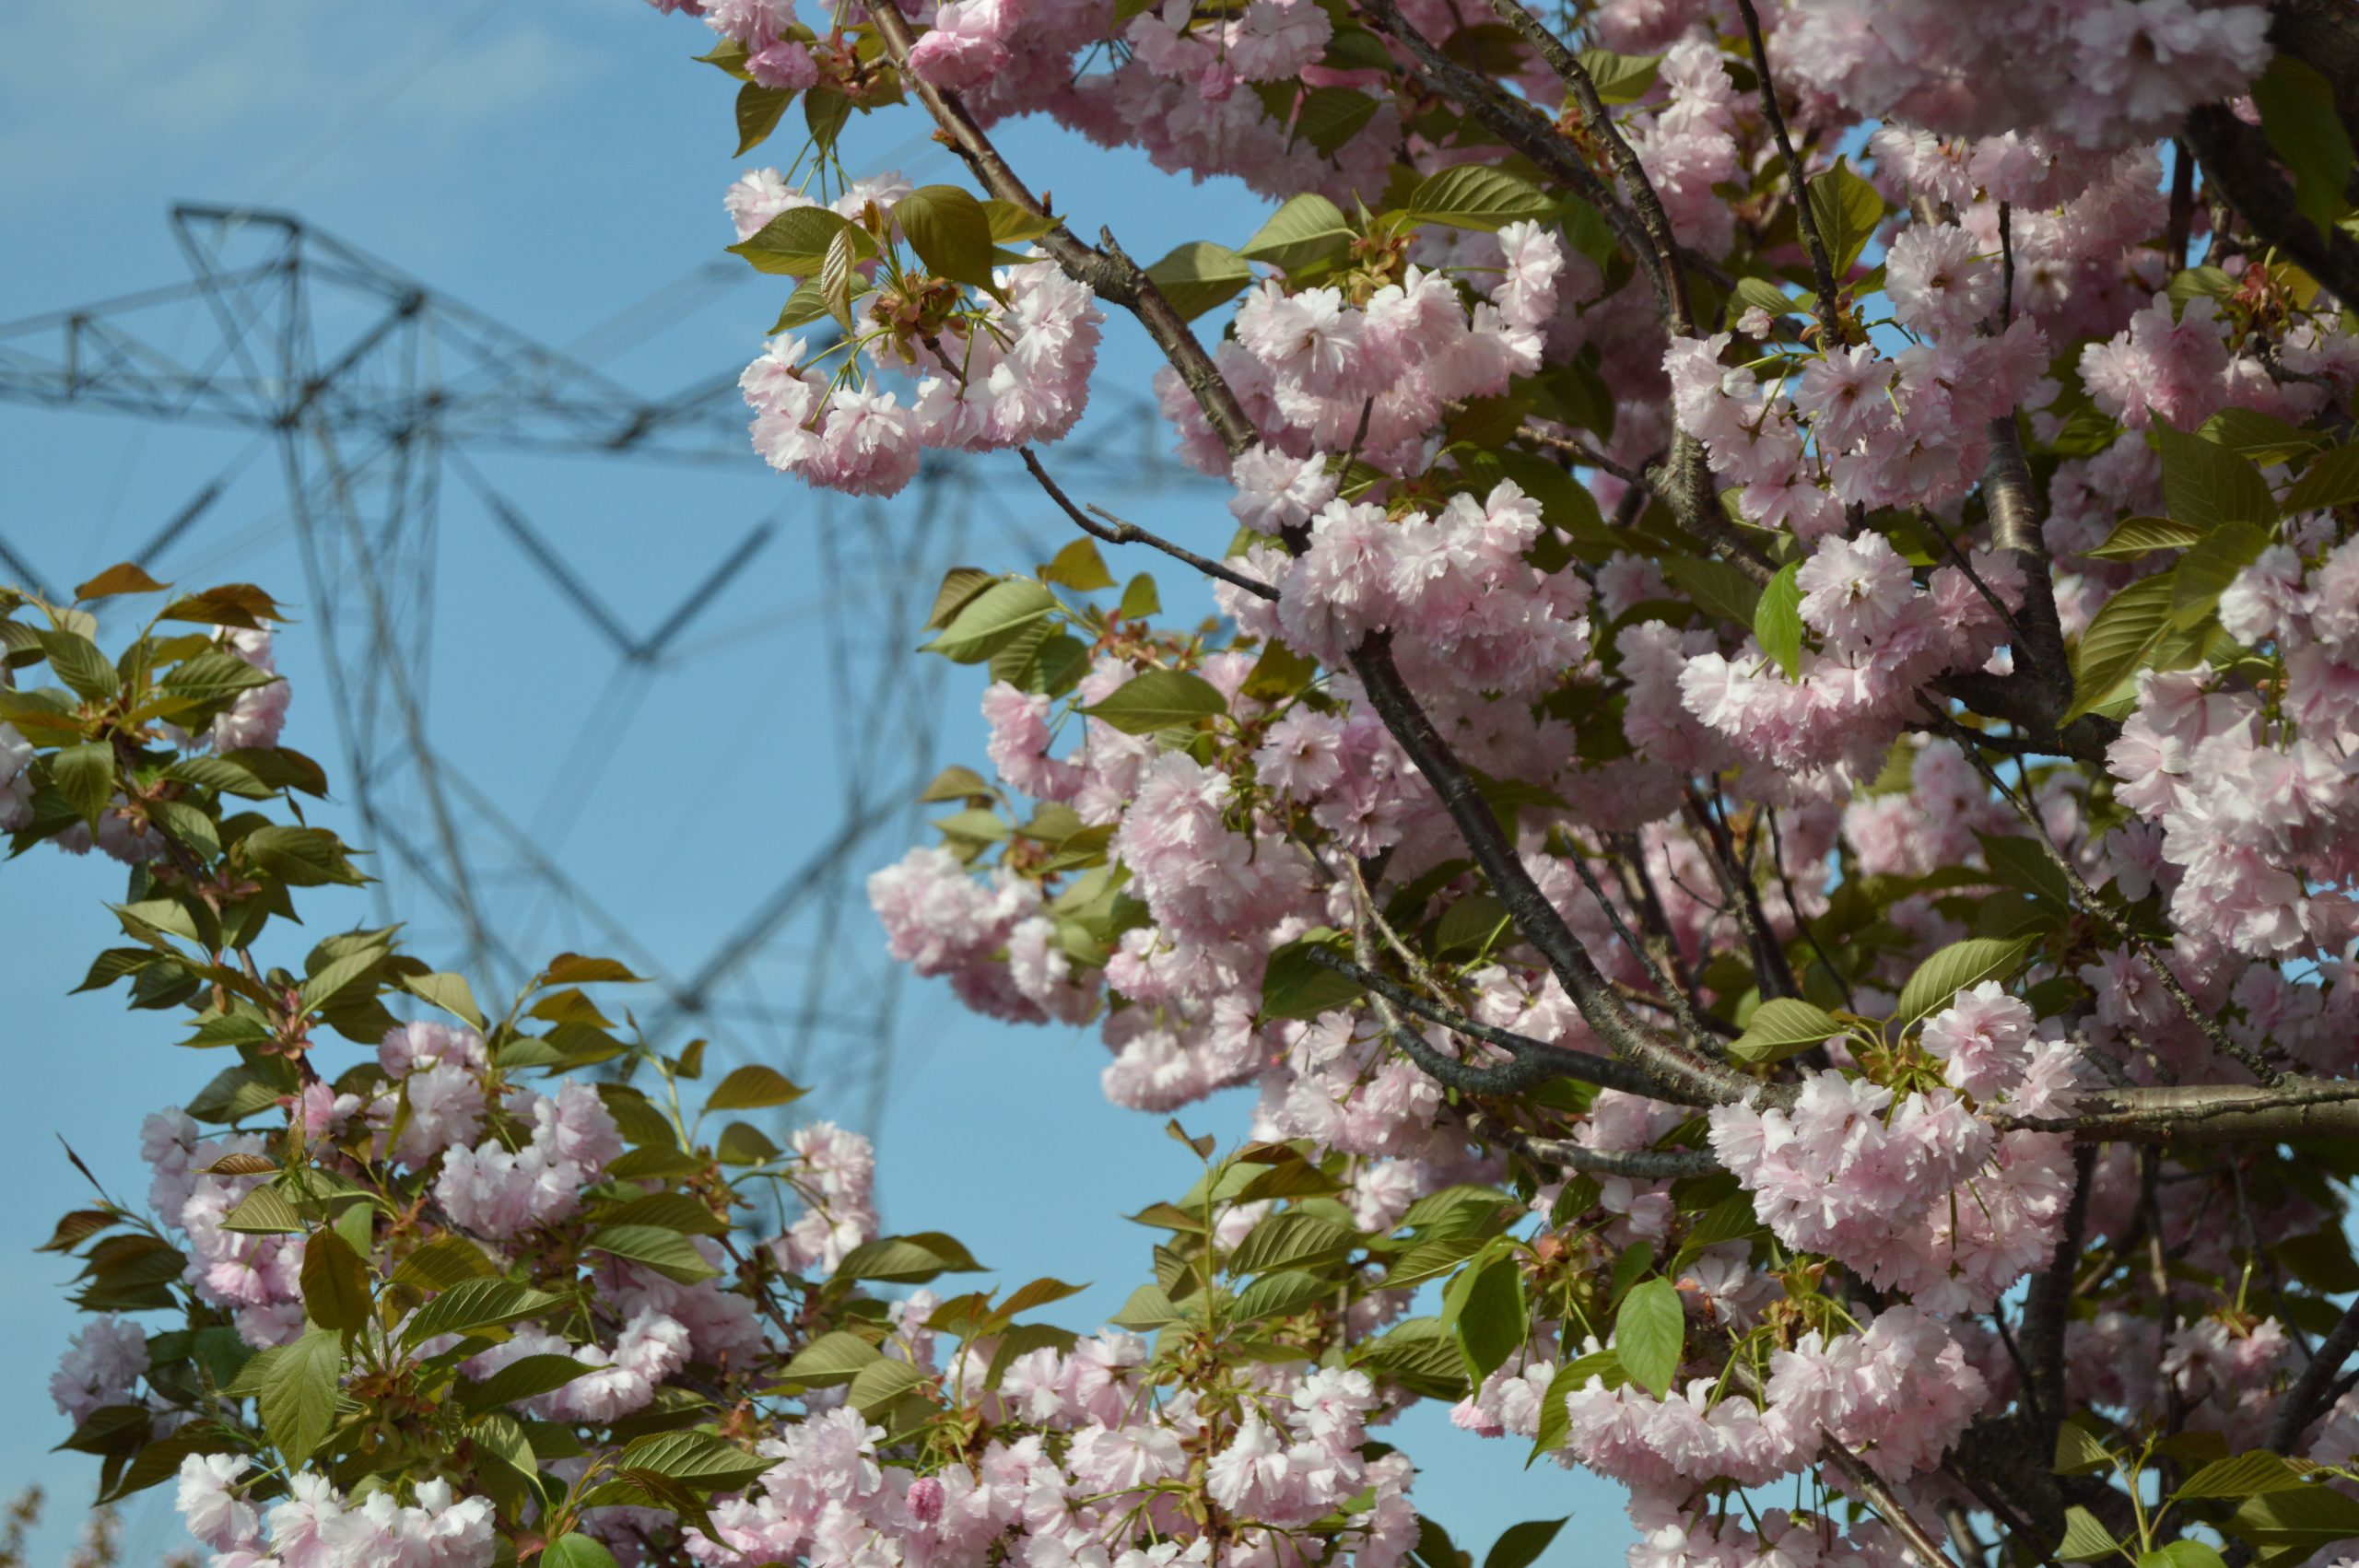 blossoming tree with pink flowers and power lines in the background